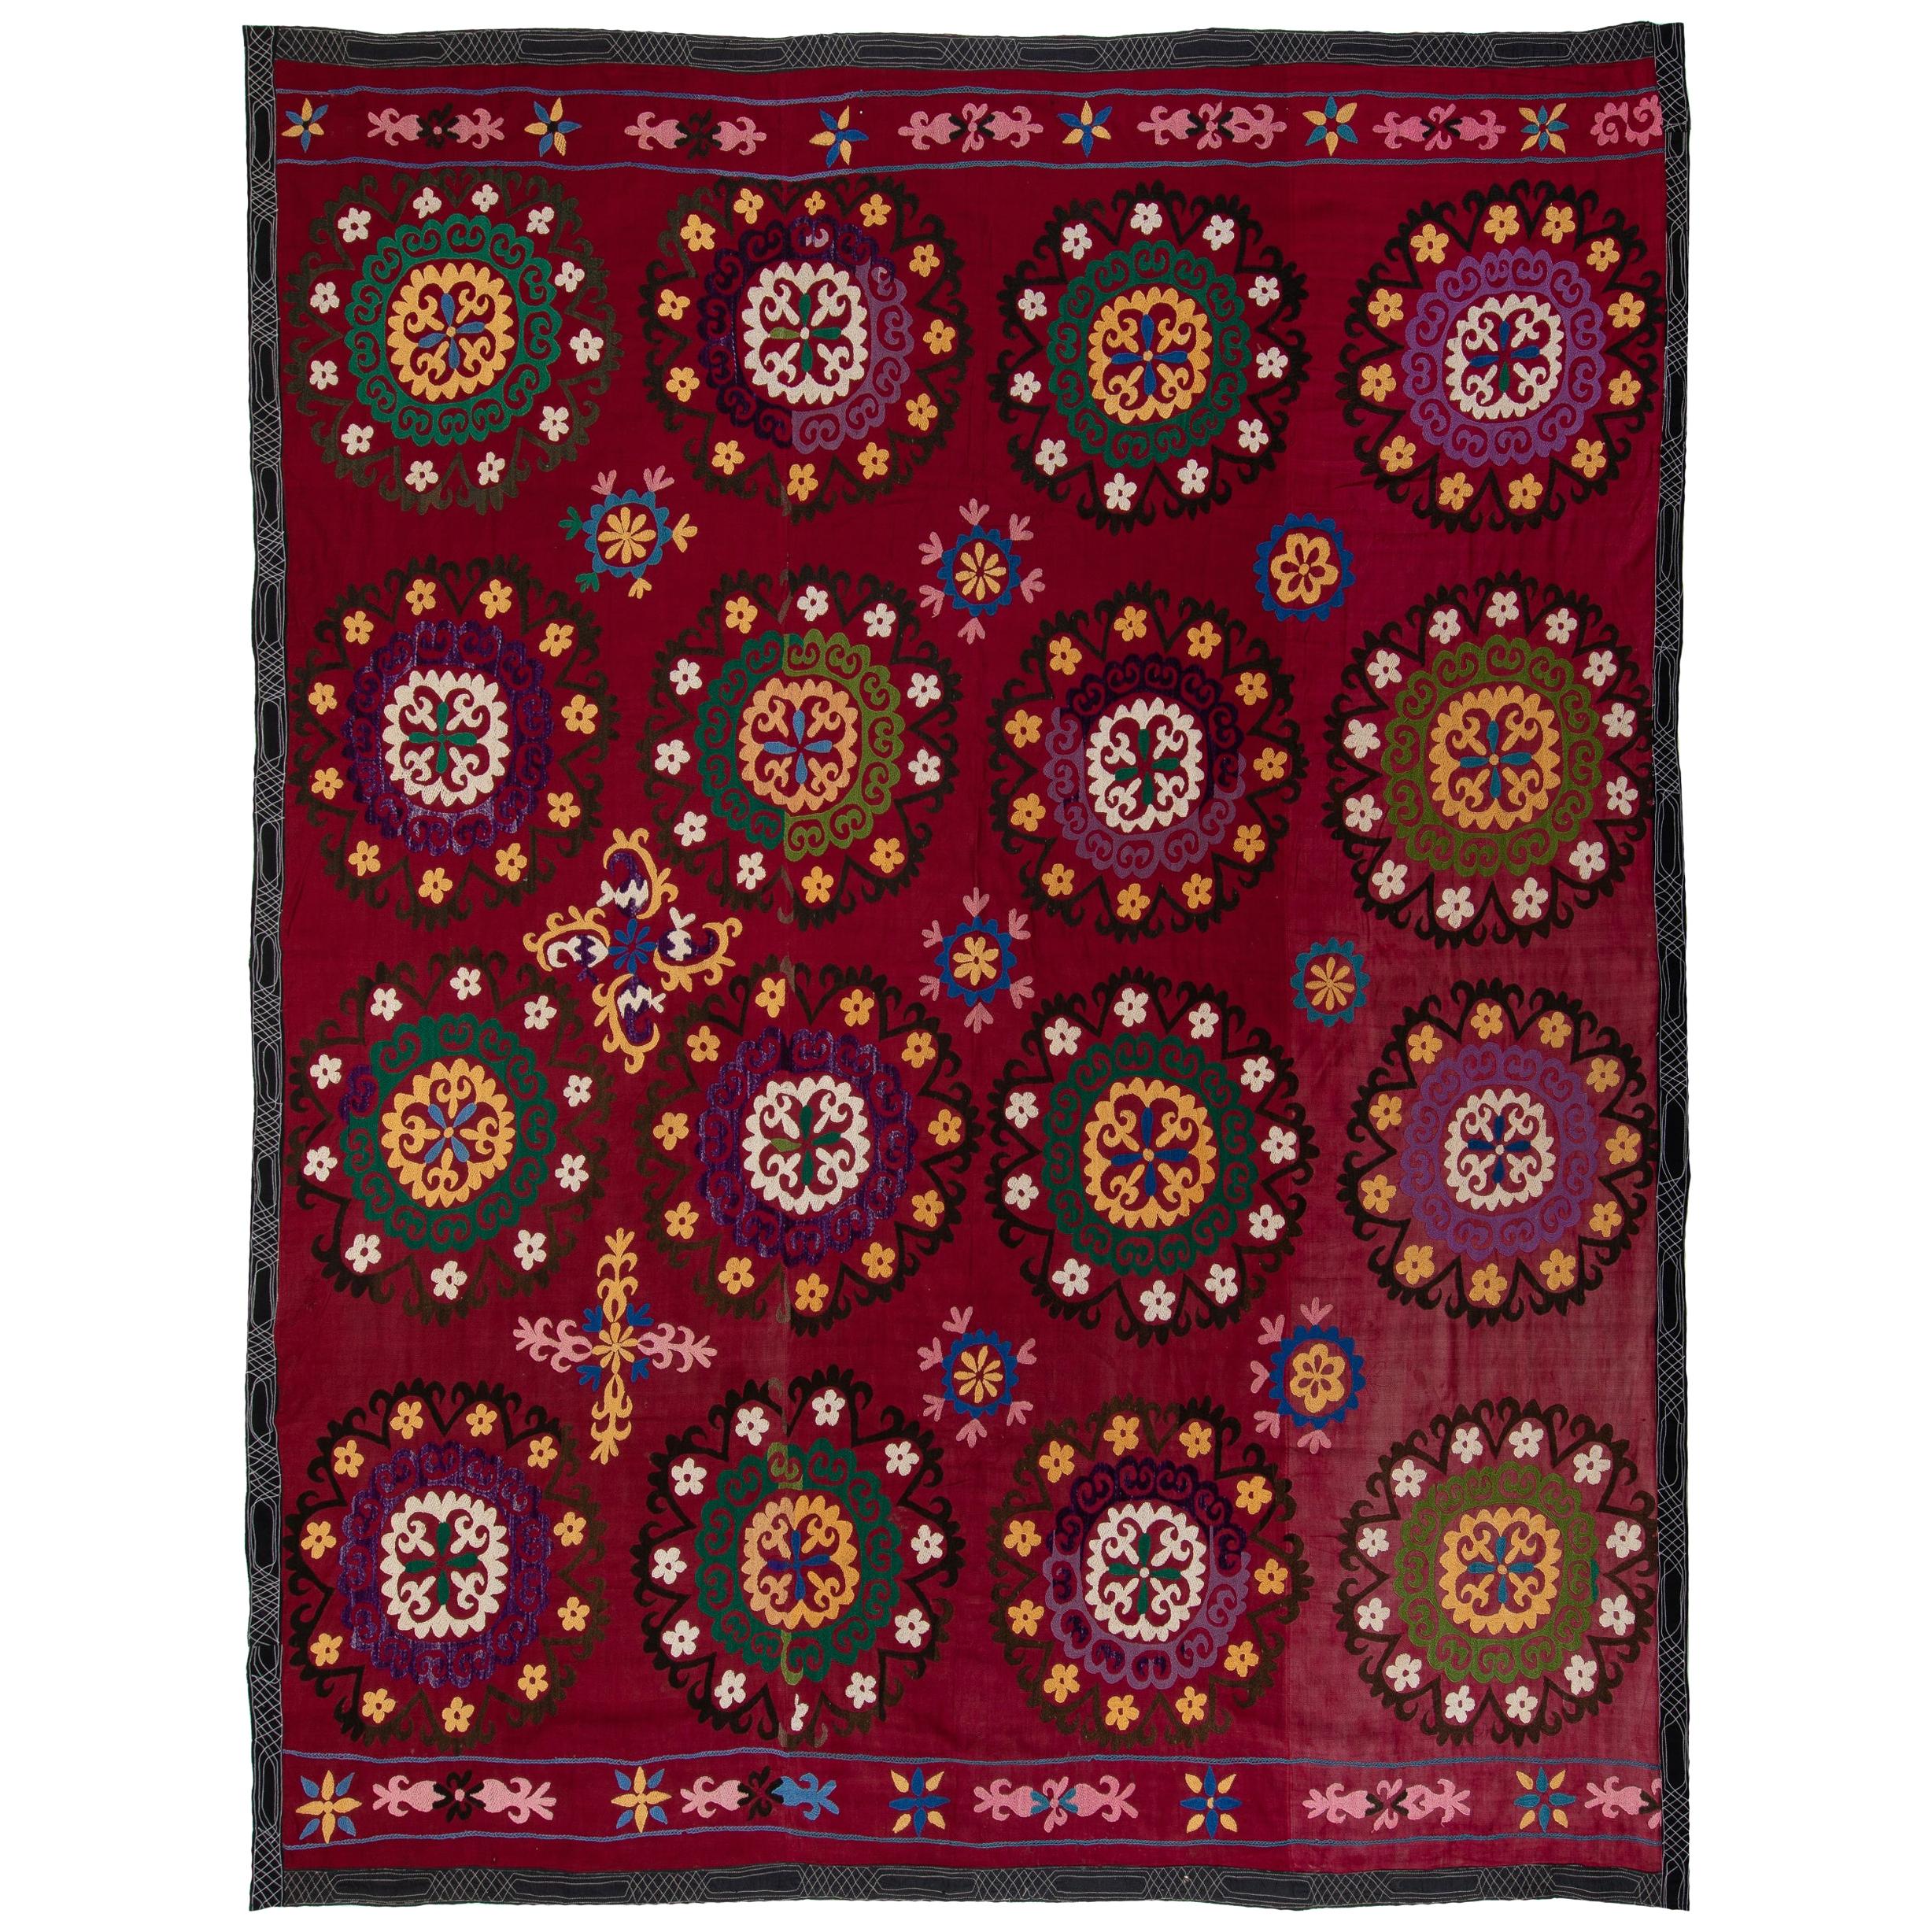 6.8x7.8 Ft Central Asian Suzani Textile, Embroidered Cotton & Silk Wall Hanging For Sale